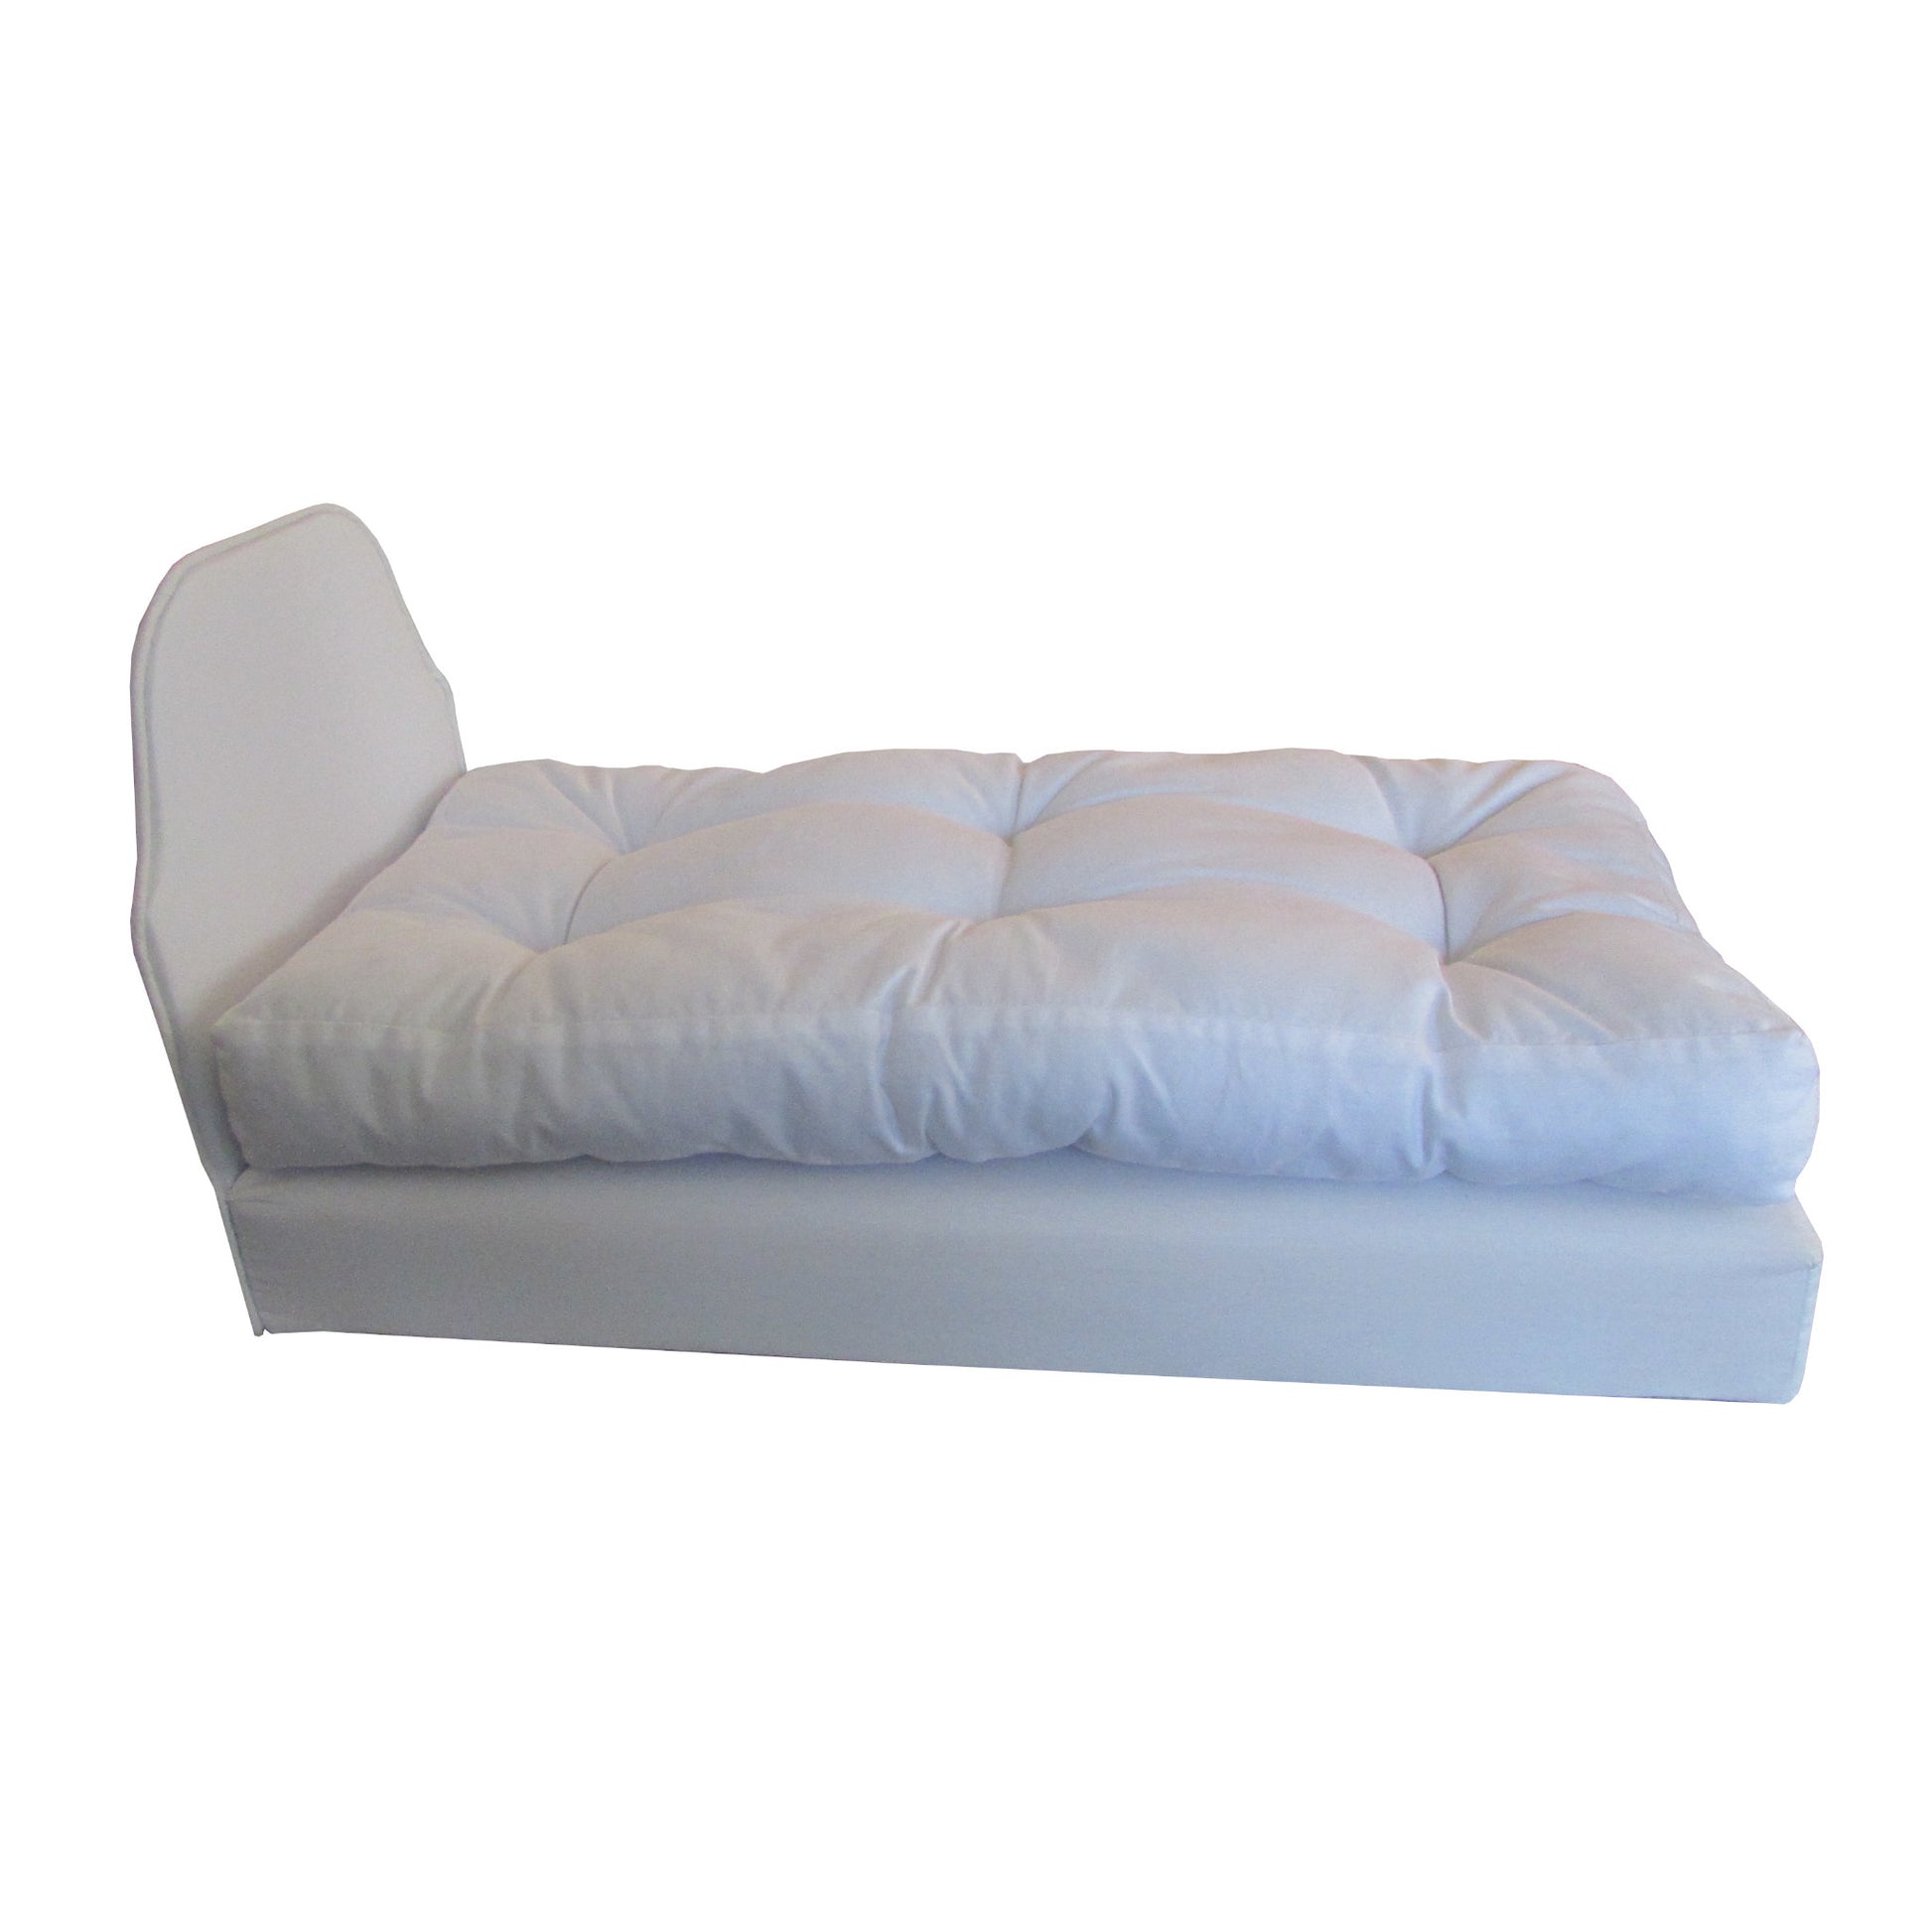 White Doll Bed for 18-inch dolls